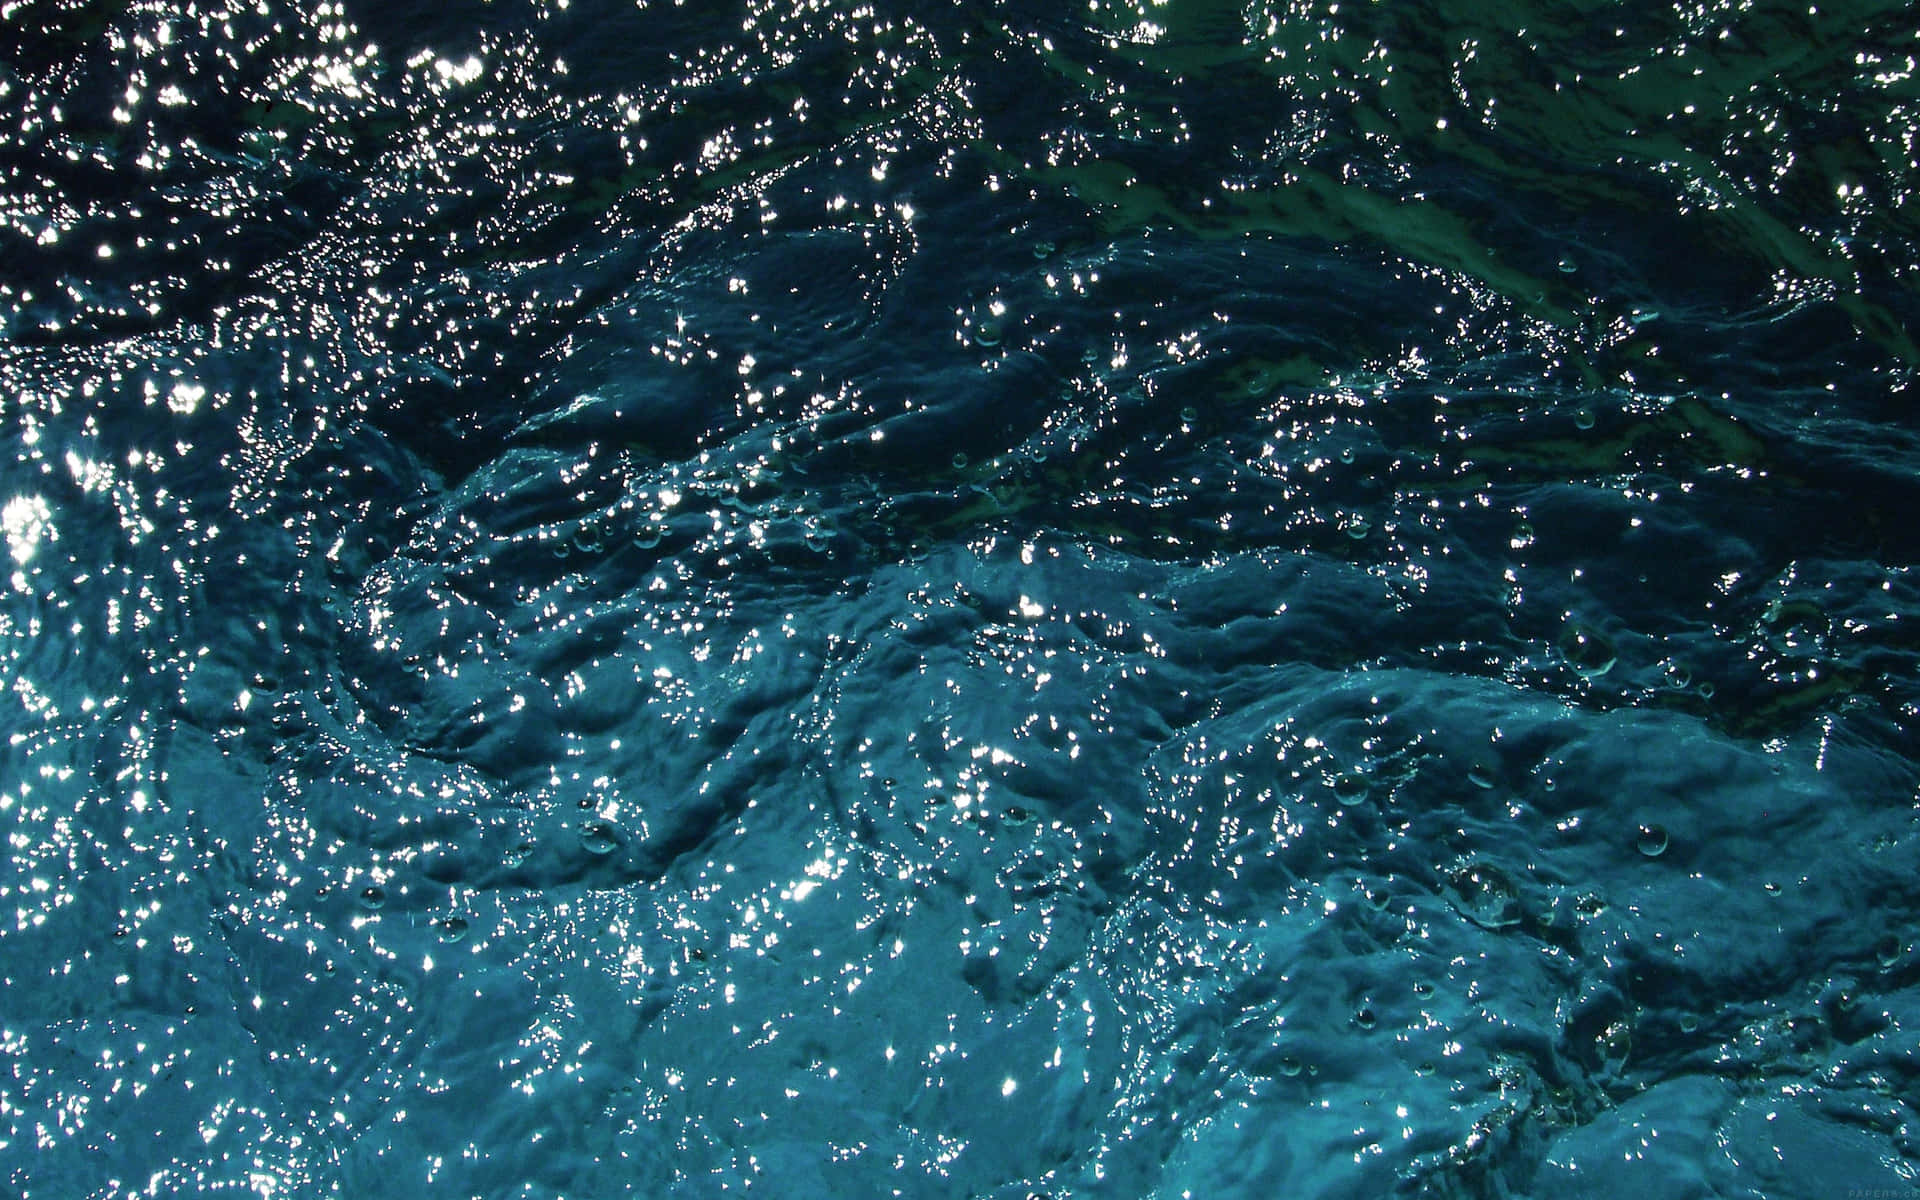 A Close Up Of The Water With Blue And Green Water